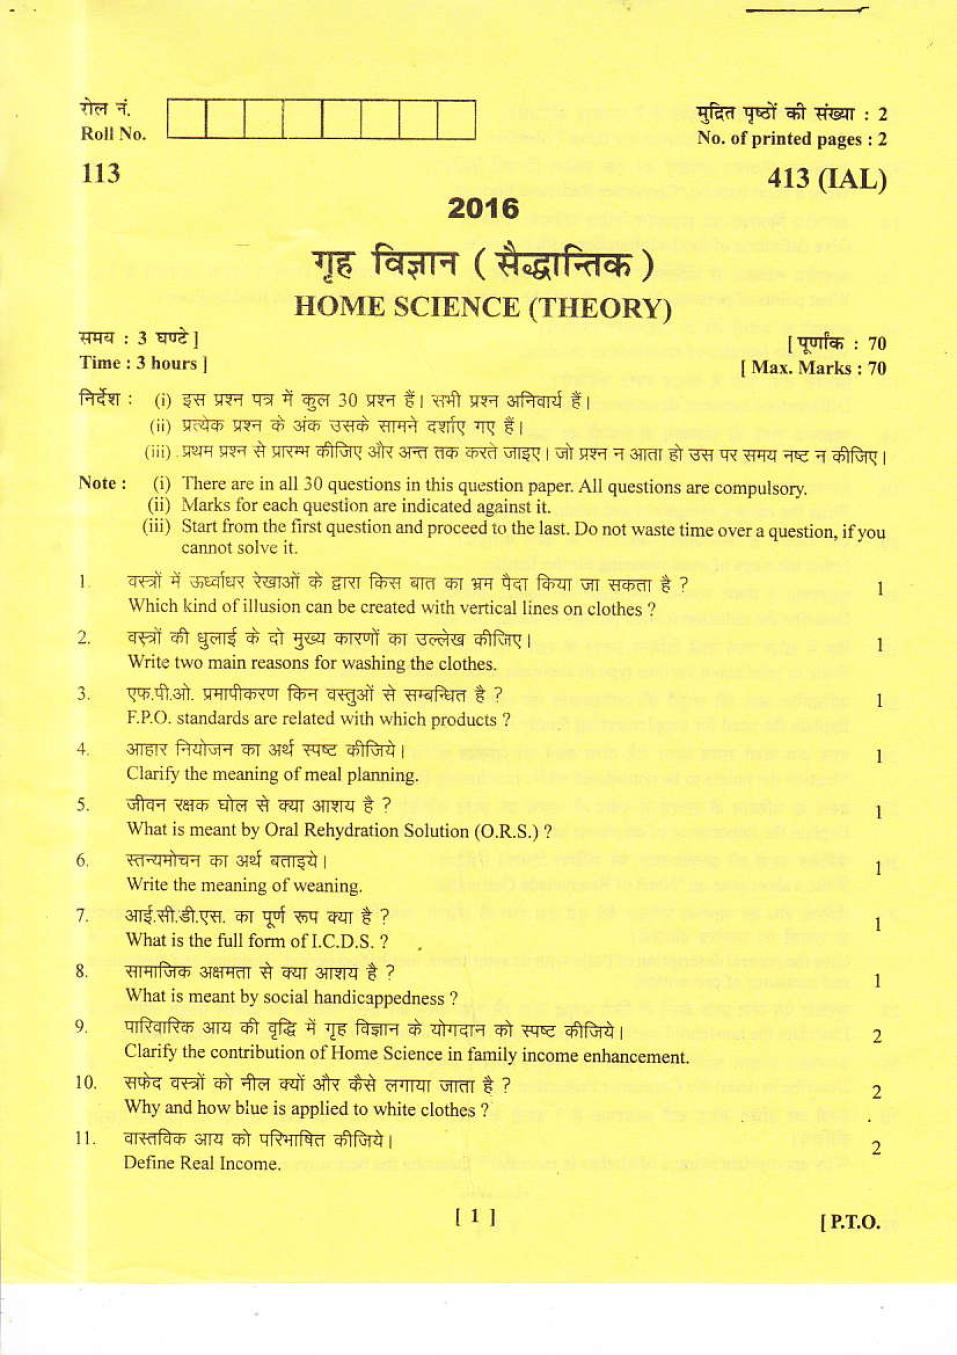 Uttarakhand Board Class 12 Question Paper 2016 for Home Science - Page 1